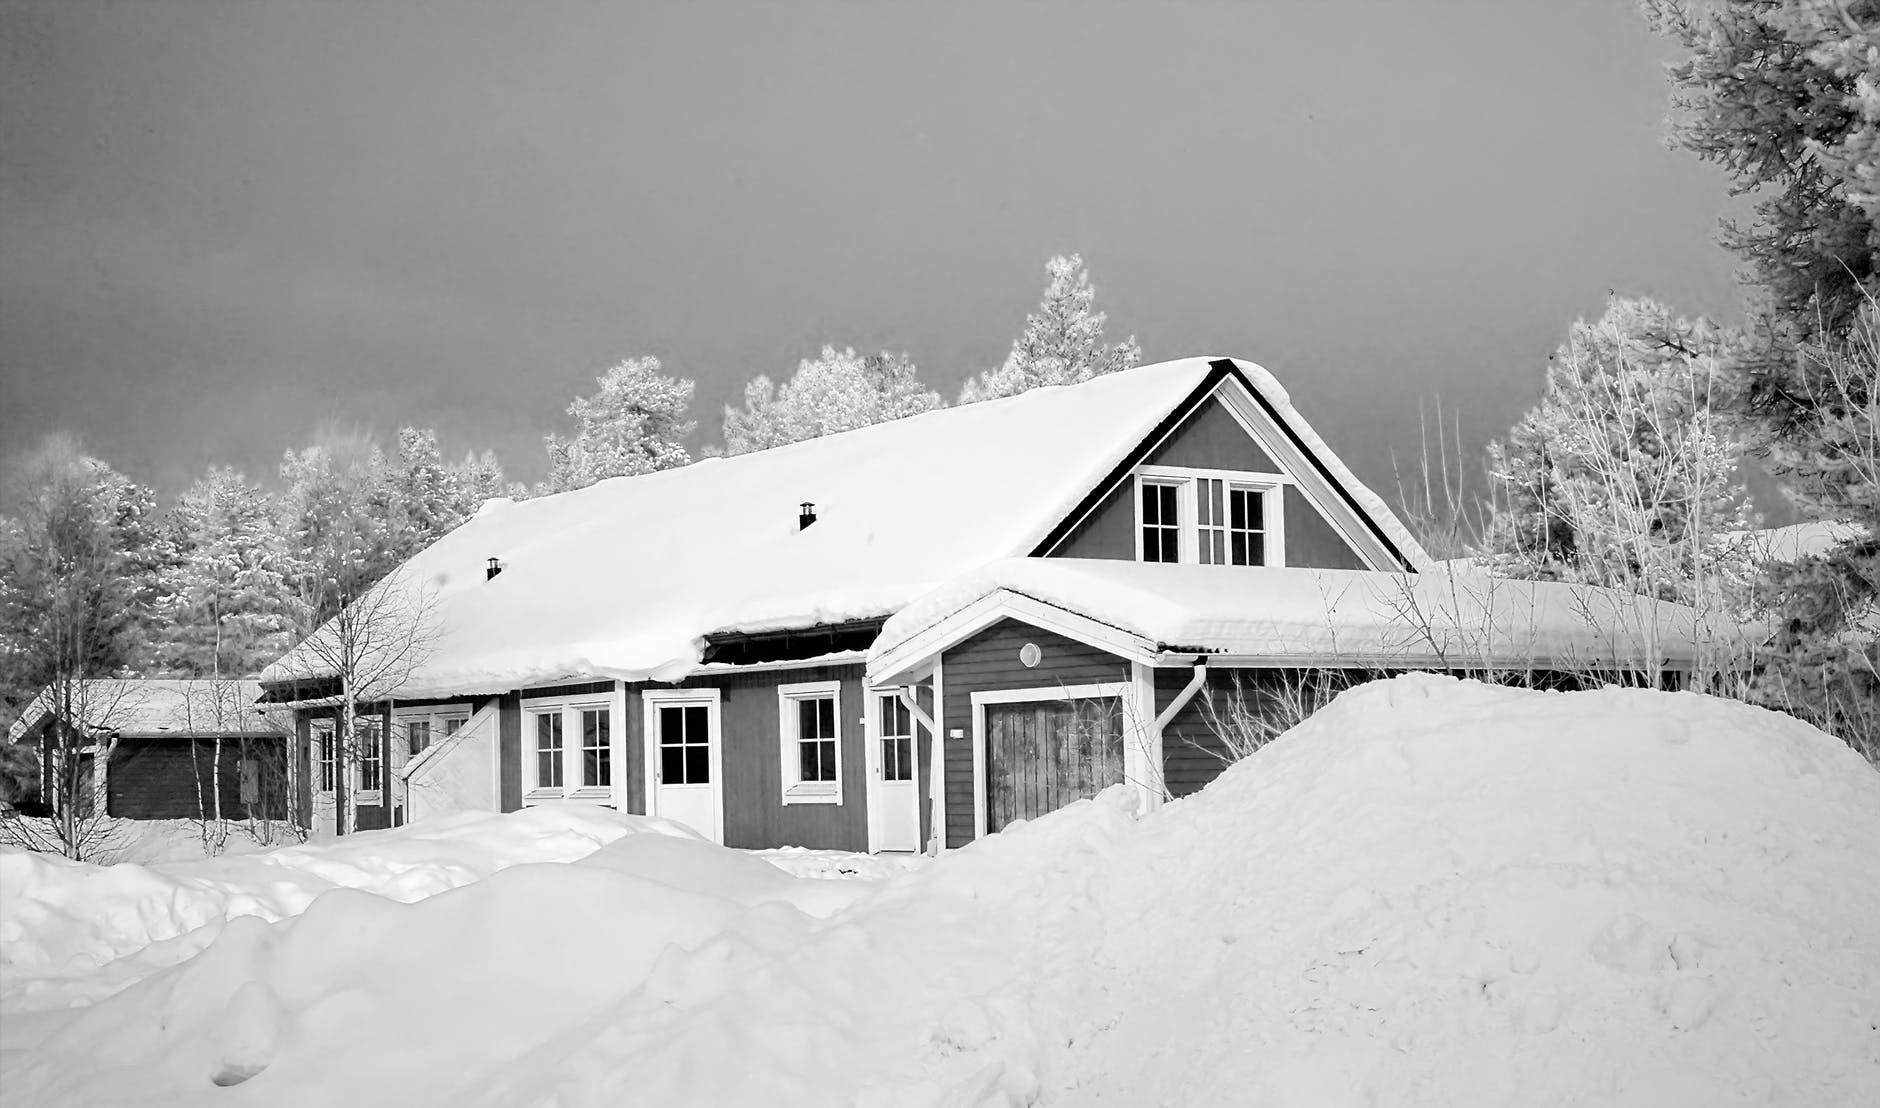 monochrome photography of snow capped house